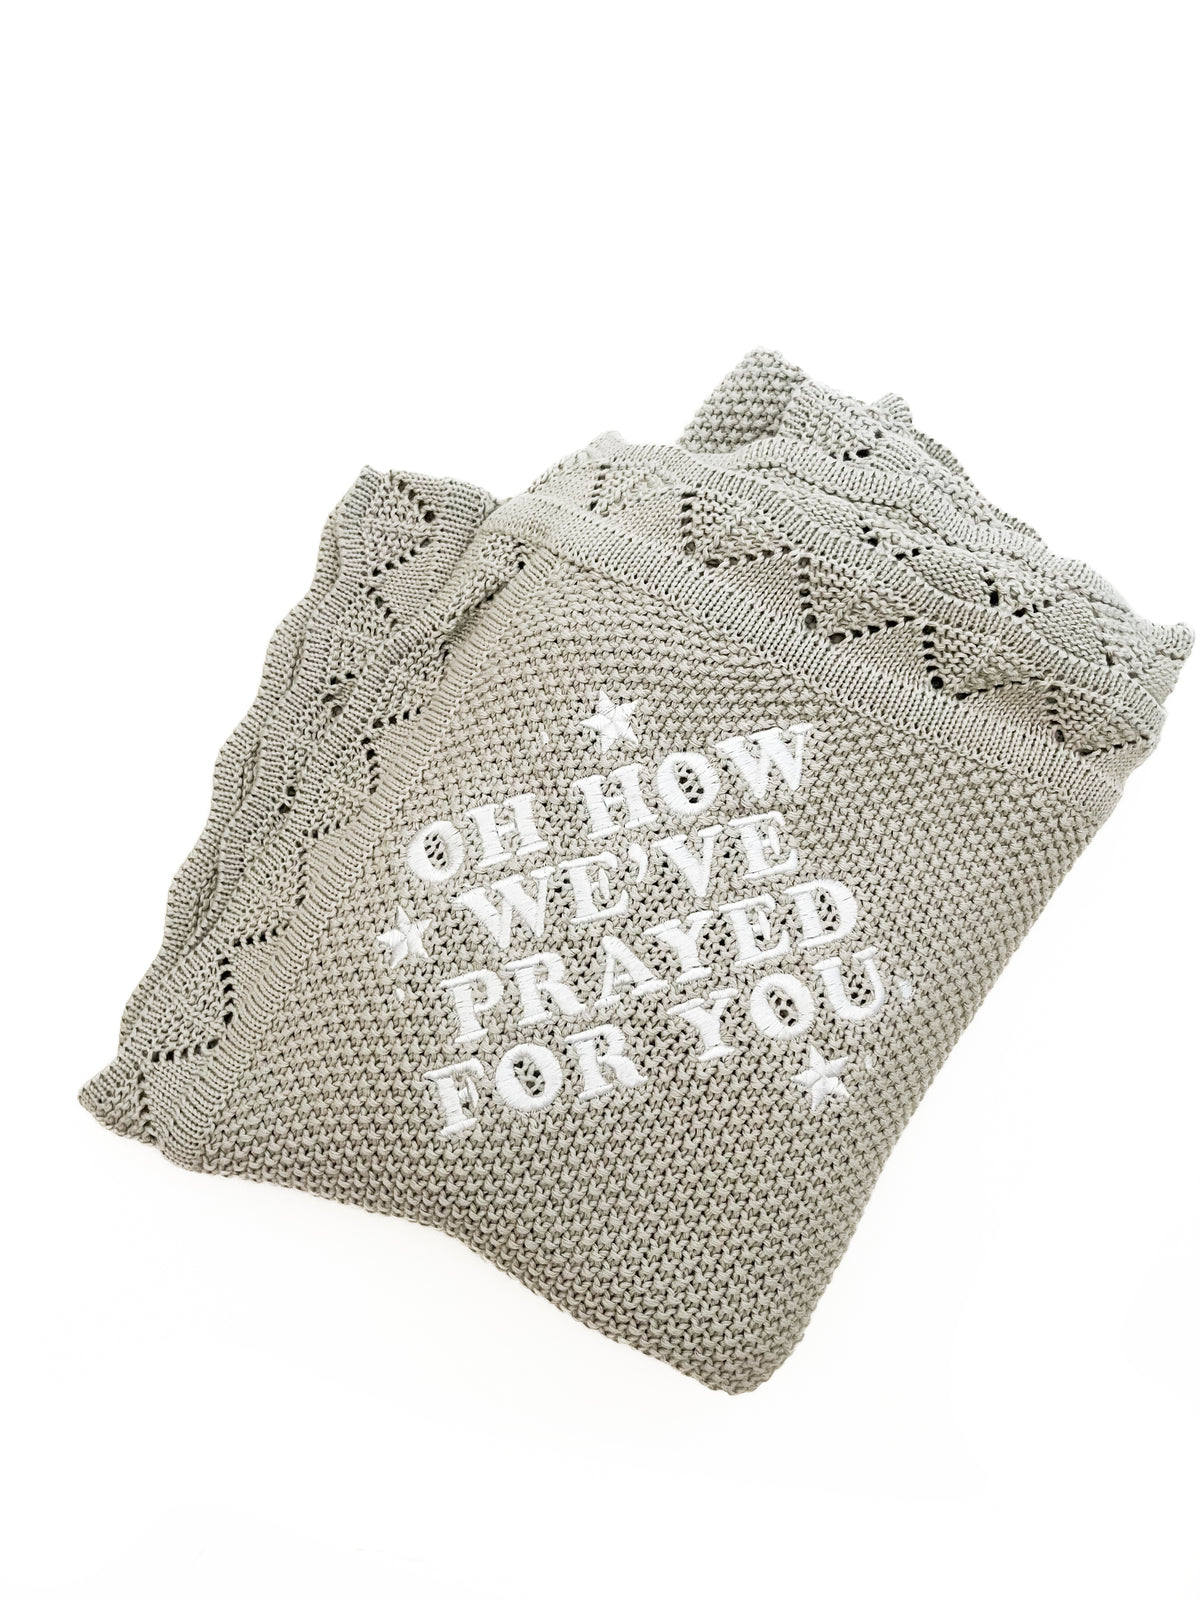 Oh How We've Prayed For You Knit Blanket